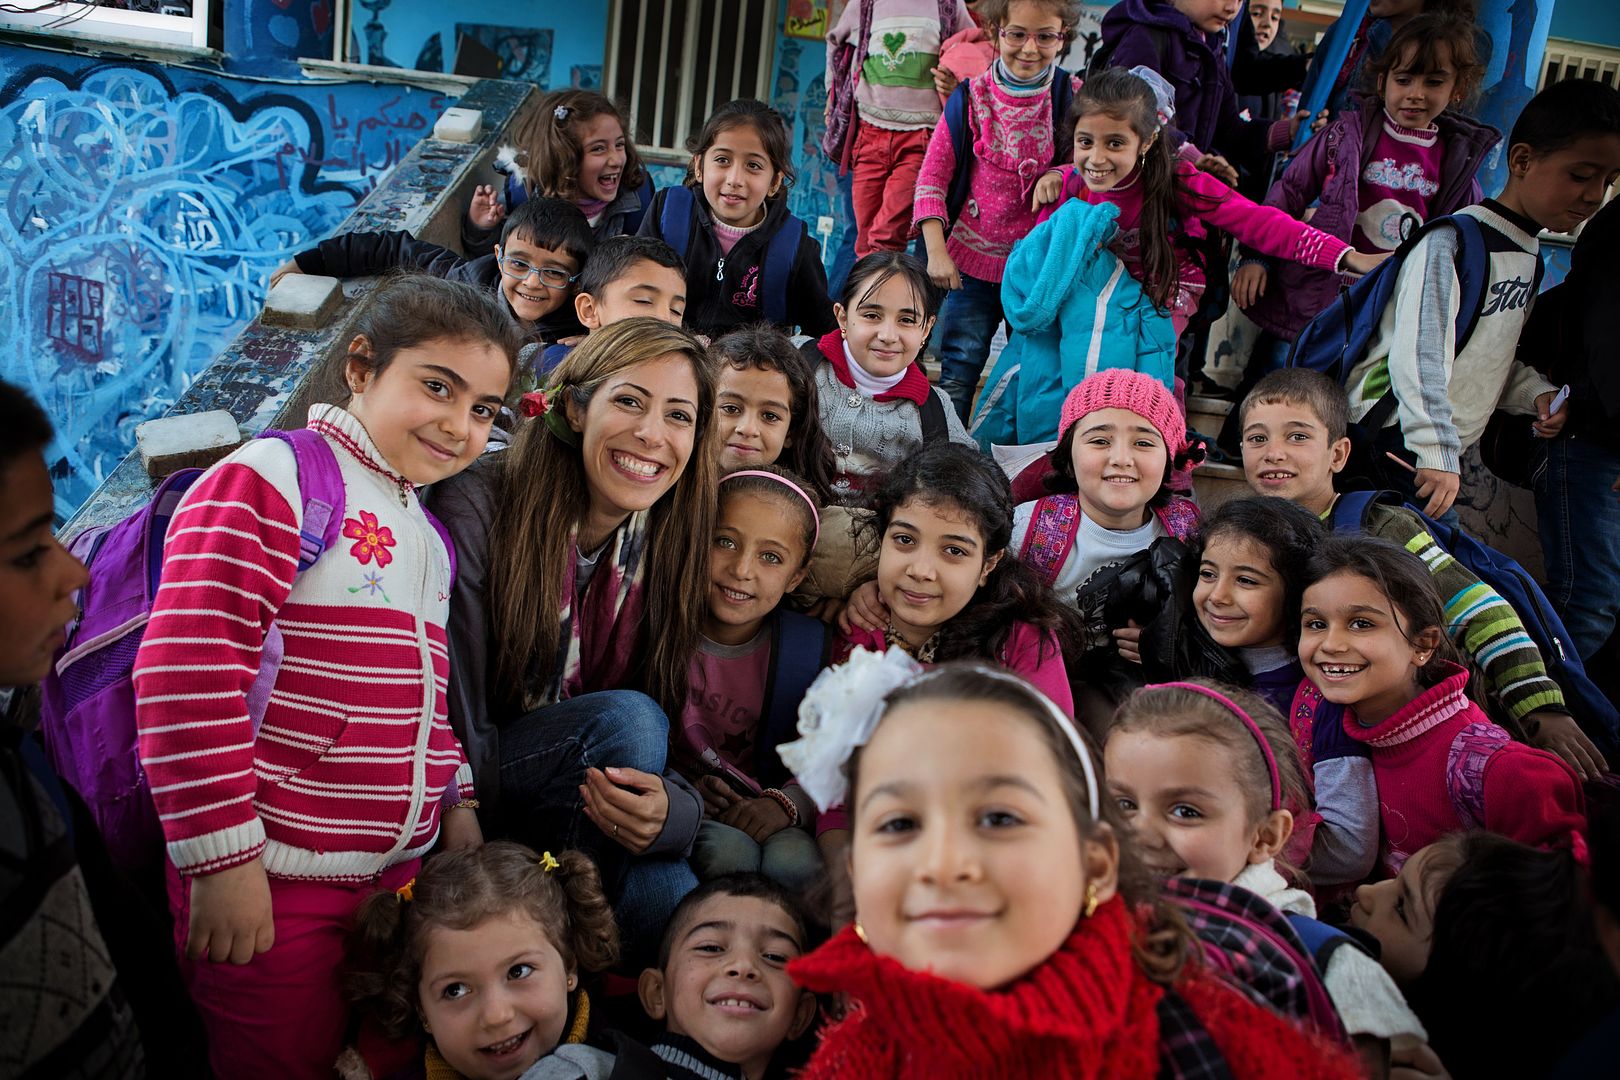 How to help Syria: Karam foundation is founded by a Syrian-American woman and doing outstanding work to support families and children